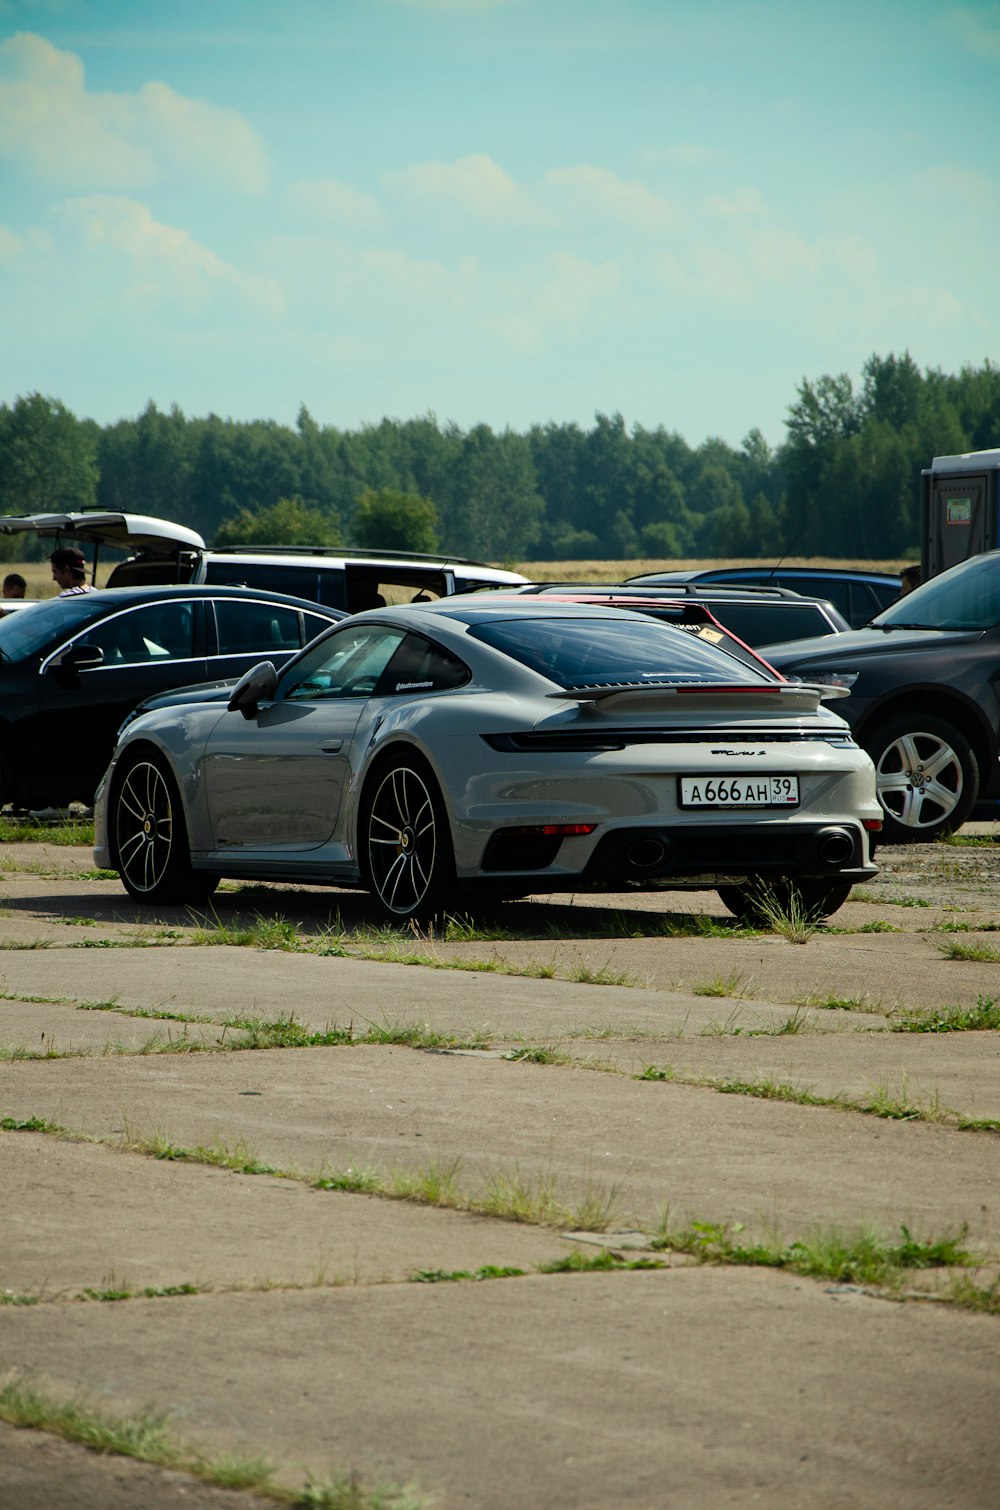 a grey sports car parked in a parking lot